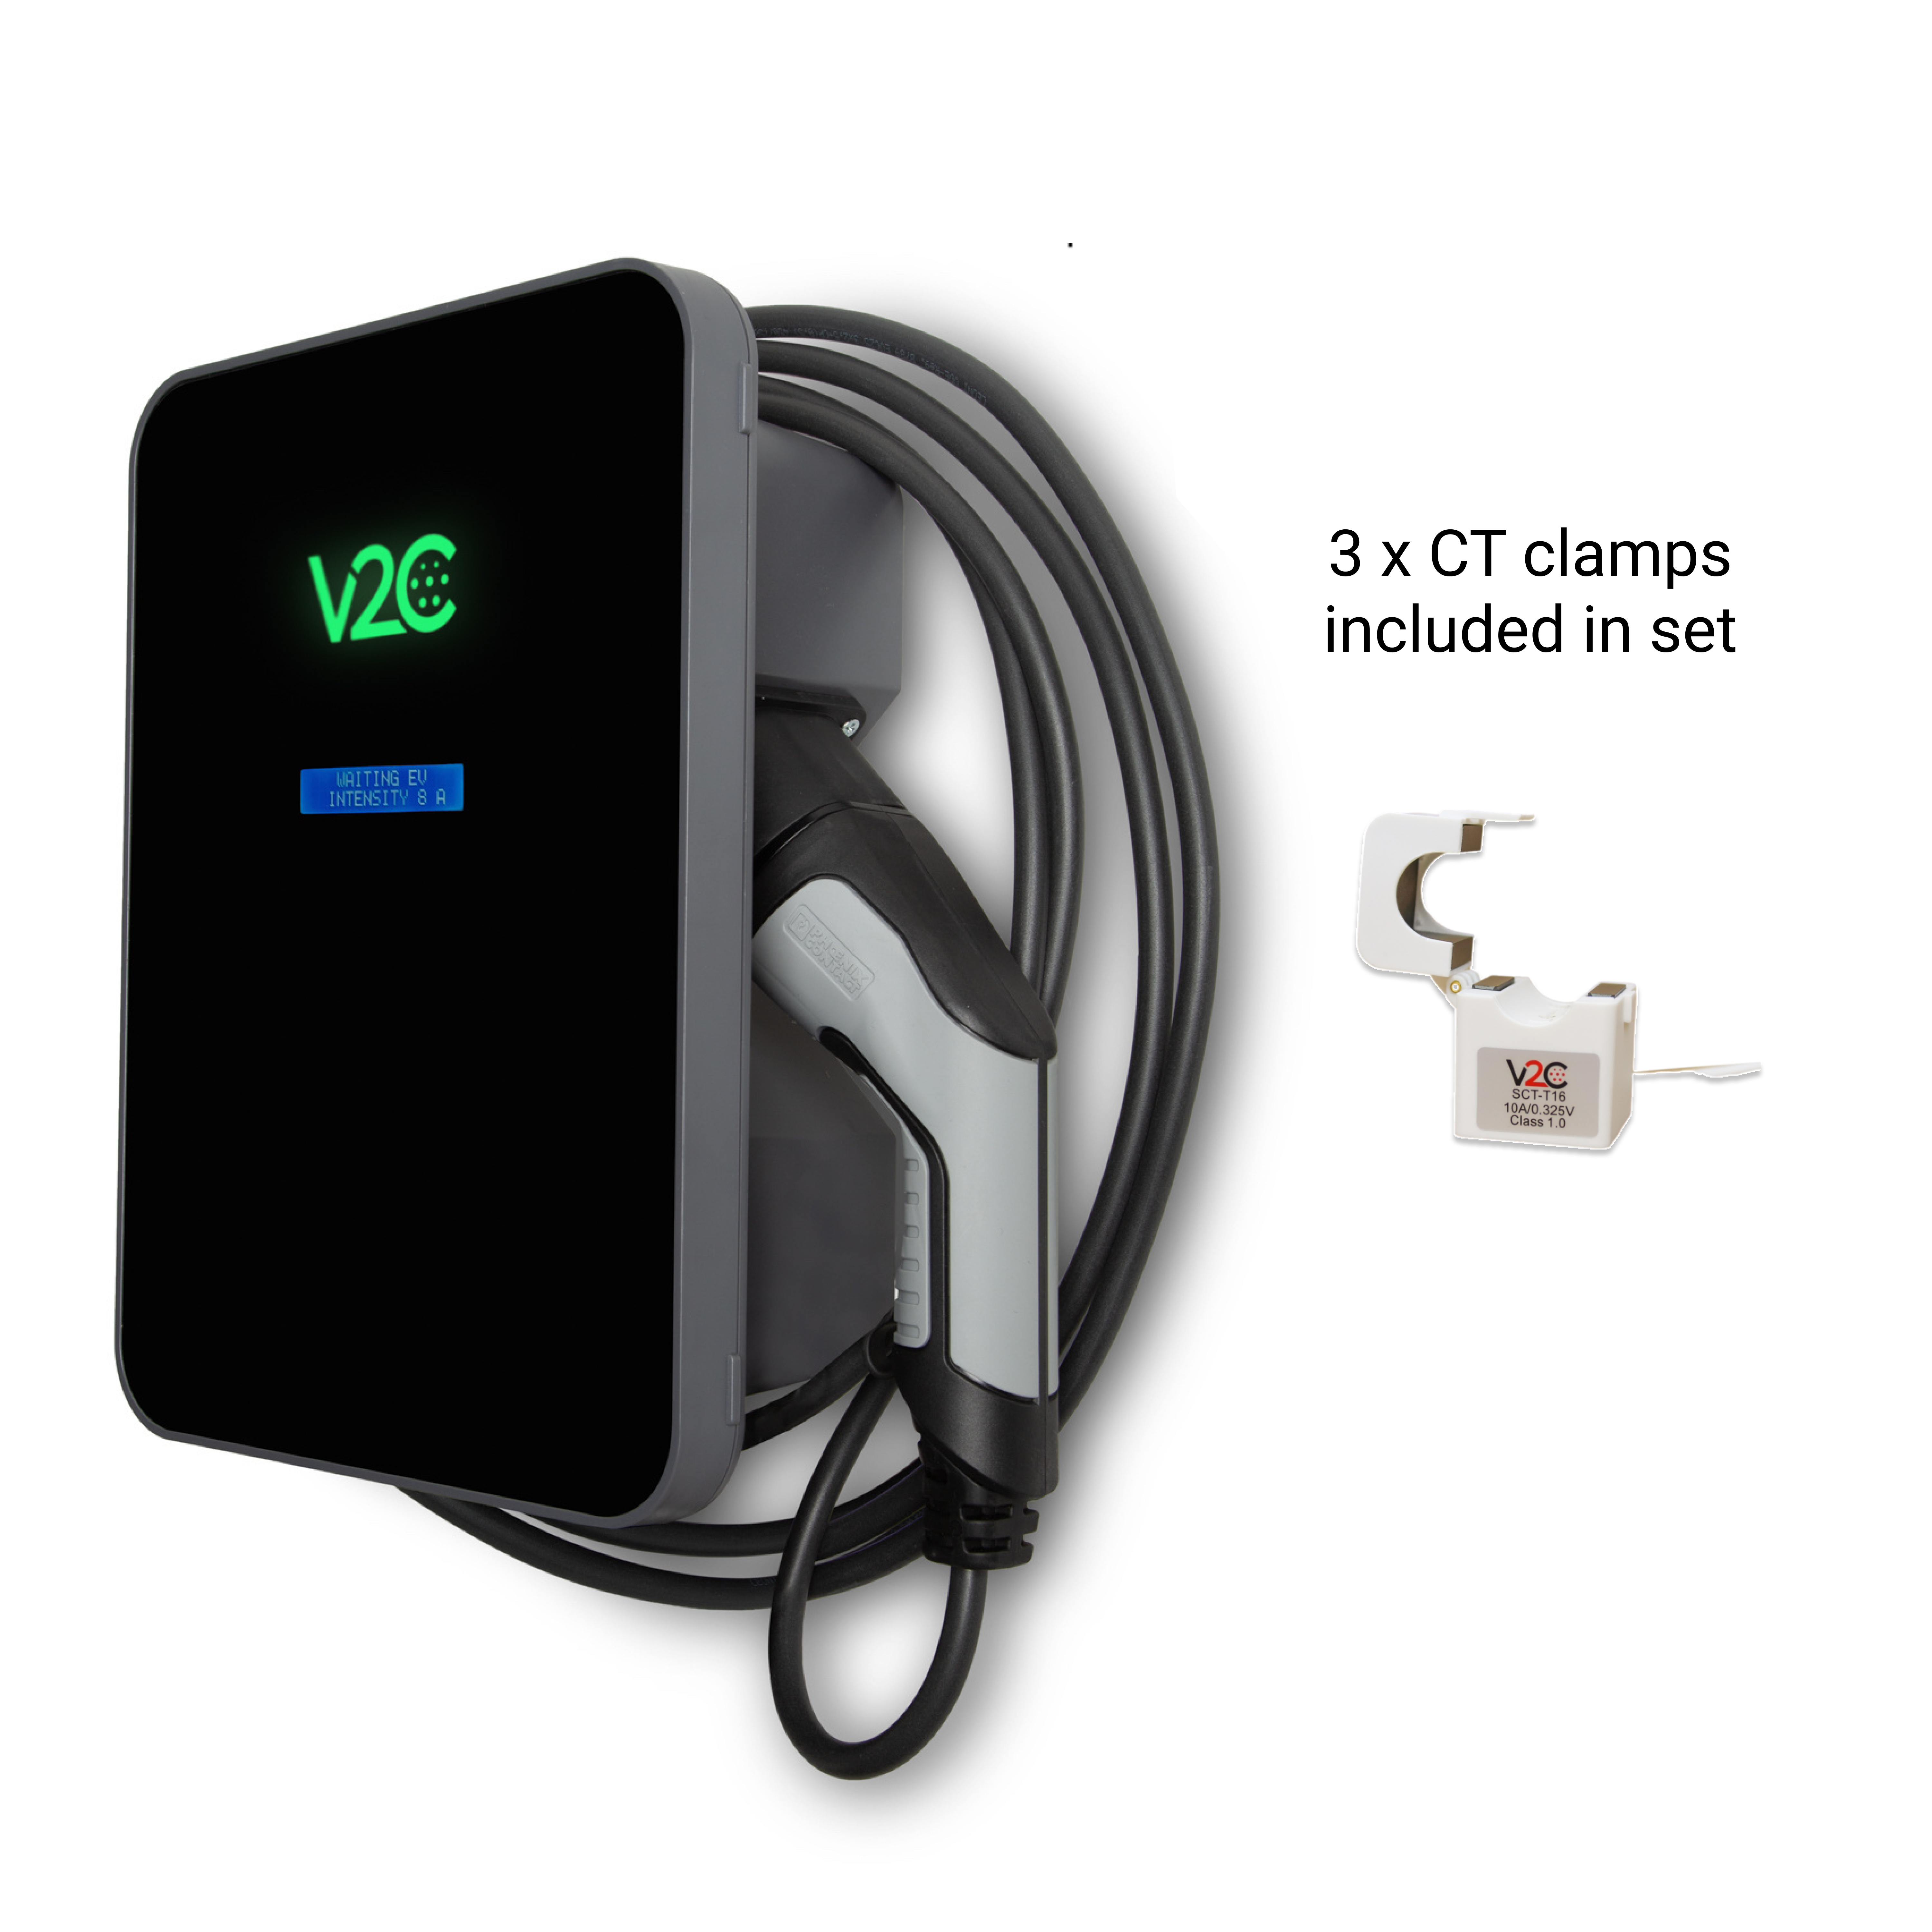 Video 3D V2C E-CHARGERS, TRYDAN